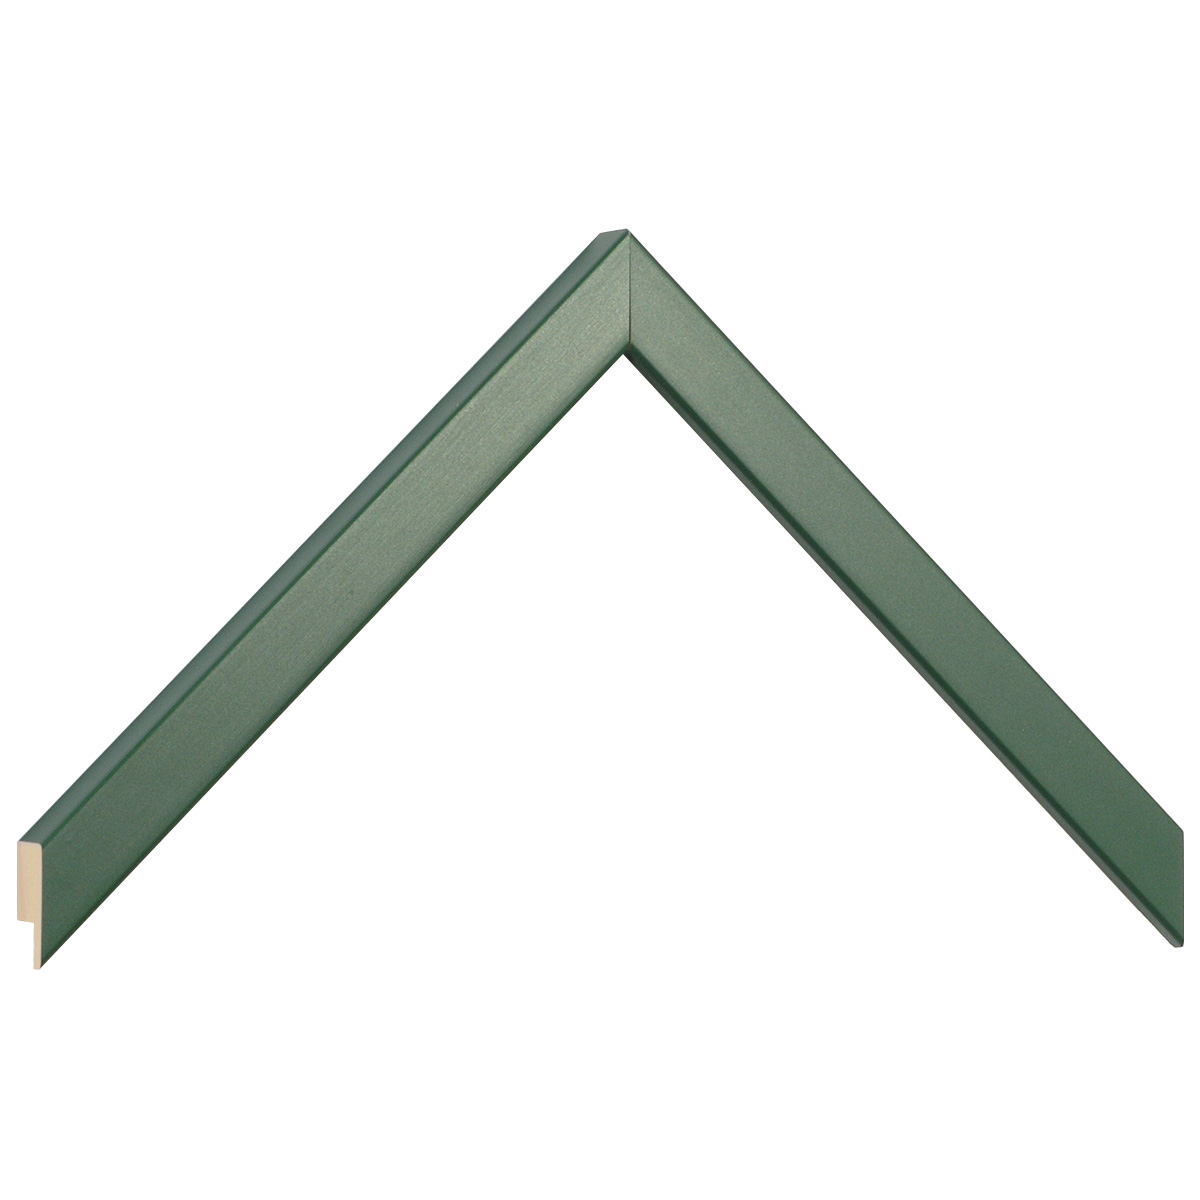 Moulding ayous width 15mm height 14 - olive - Sample